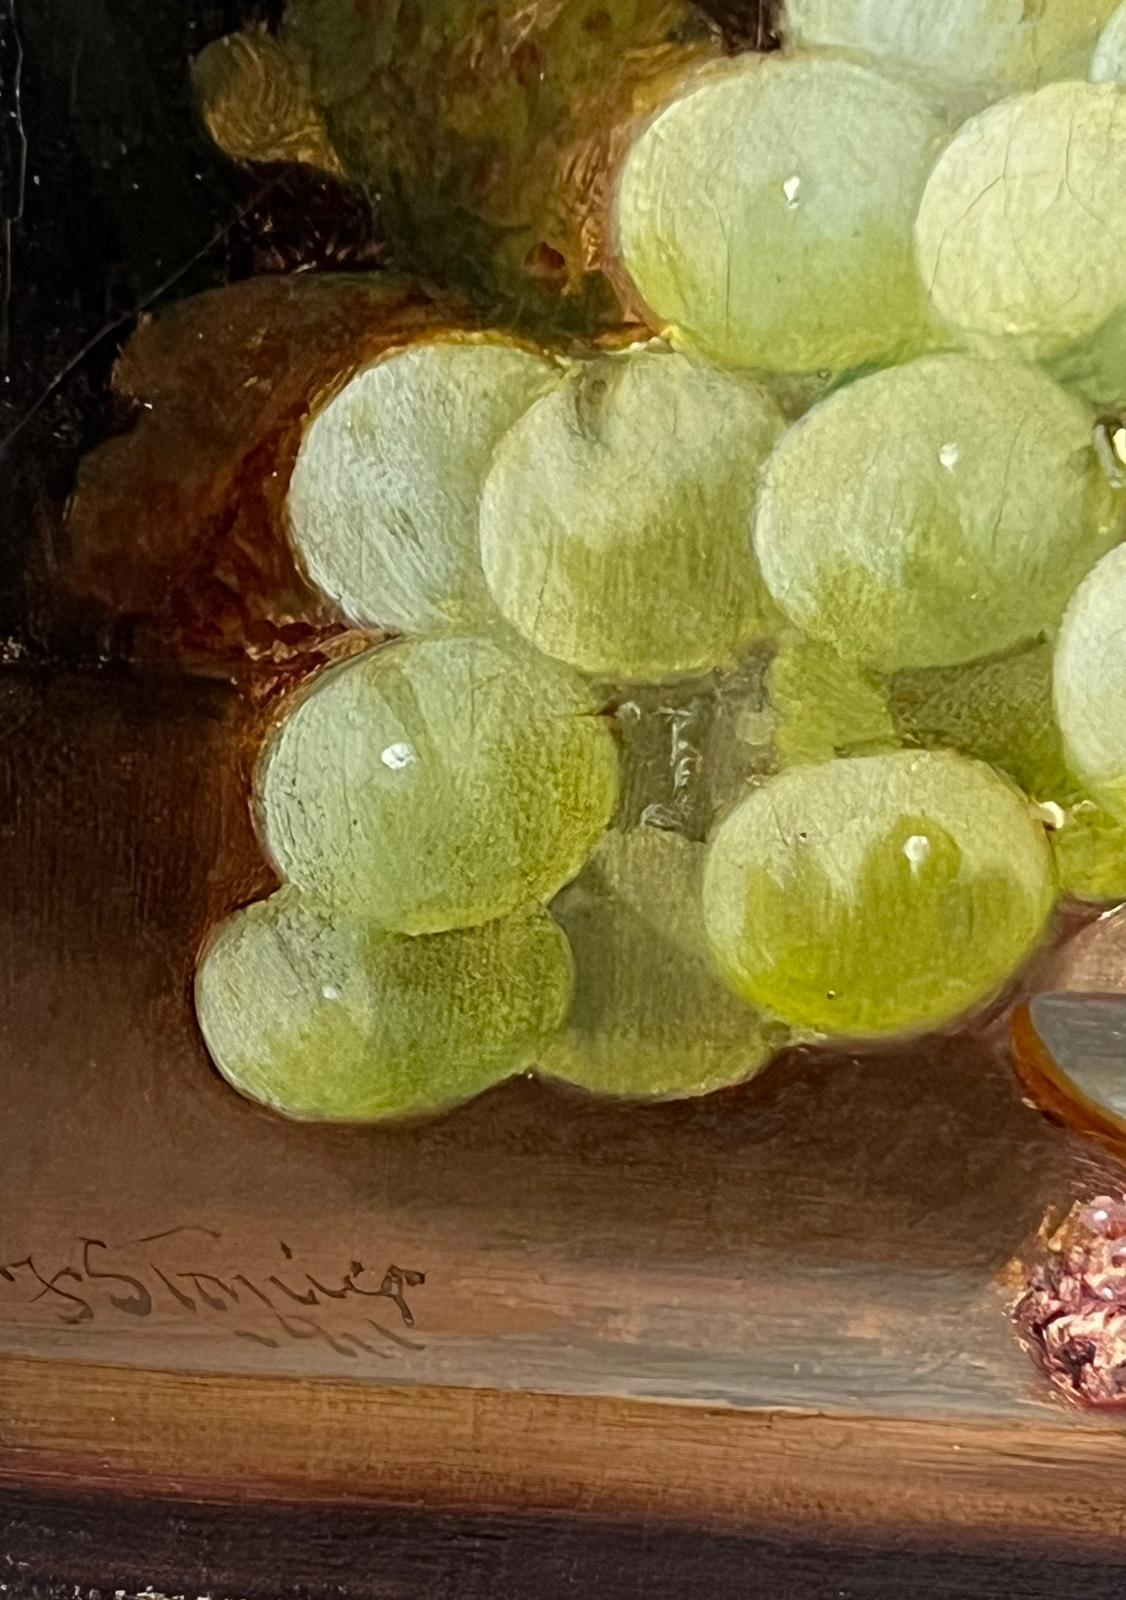 Still Life of Fruit
by Frederick J Stanier (1830-c.1912) 
oil on canvas, unframed
canvas: 8.25 x 10 inches
provenance: private collection, England
condition: a few minor scuffs and marks but overall very good and sound condition 